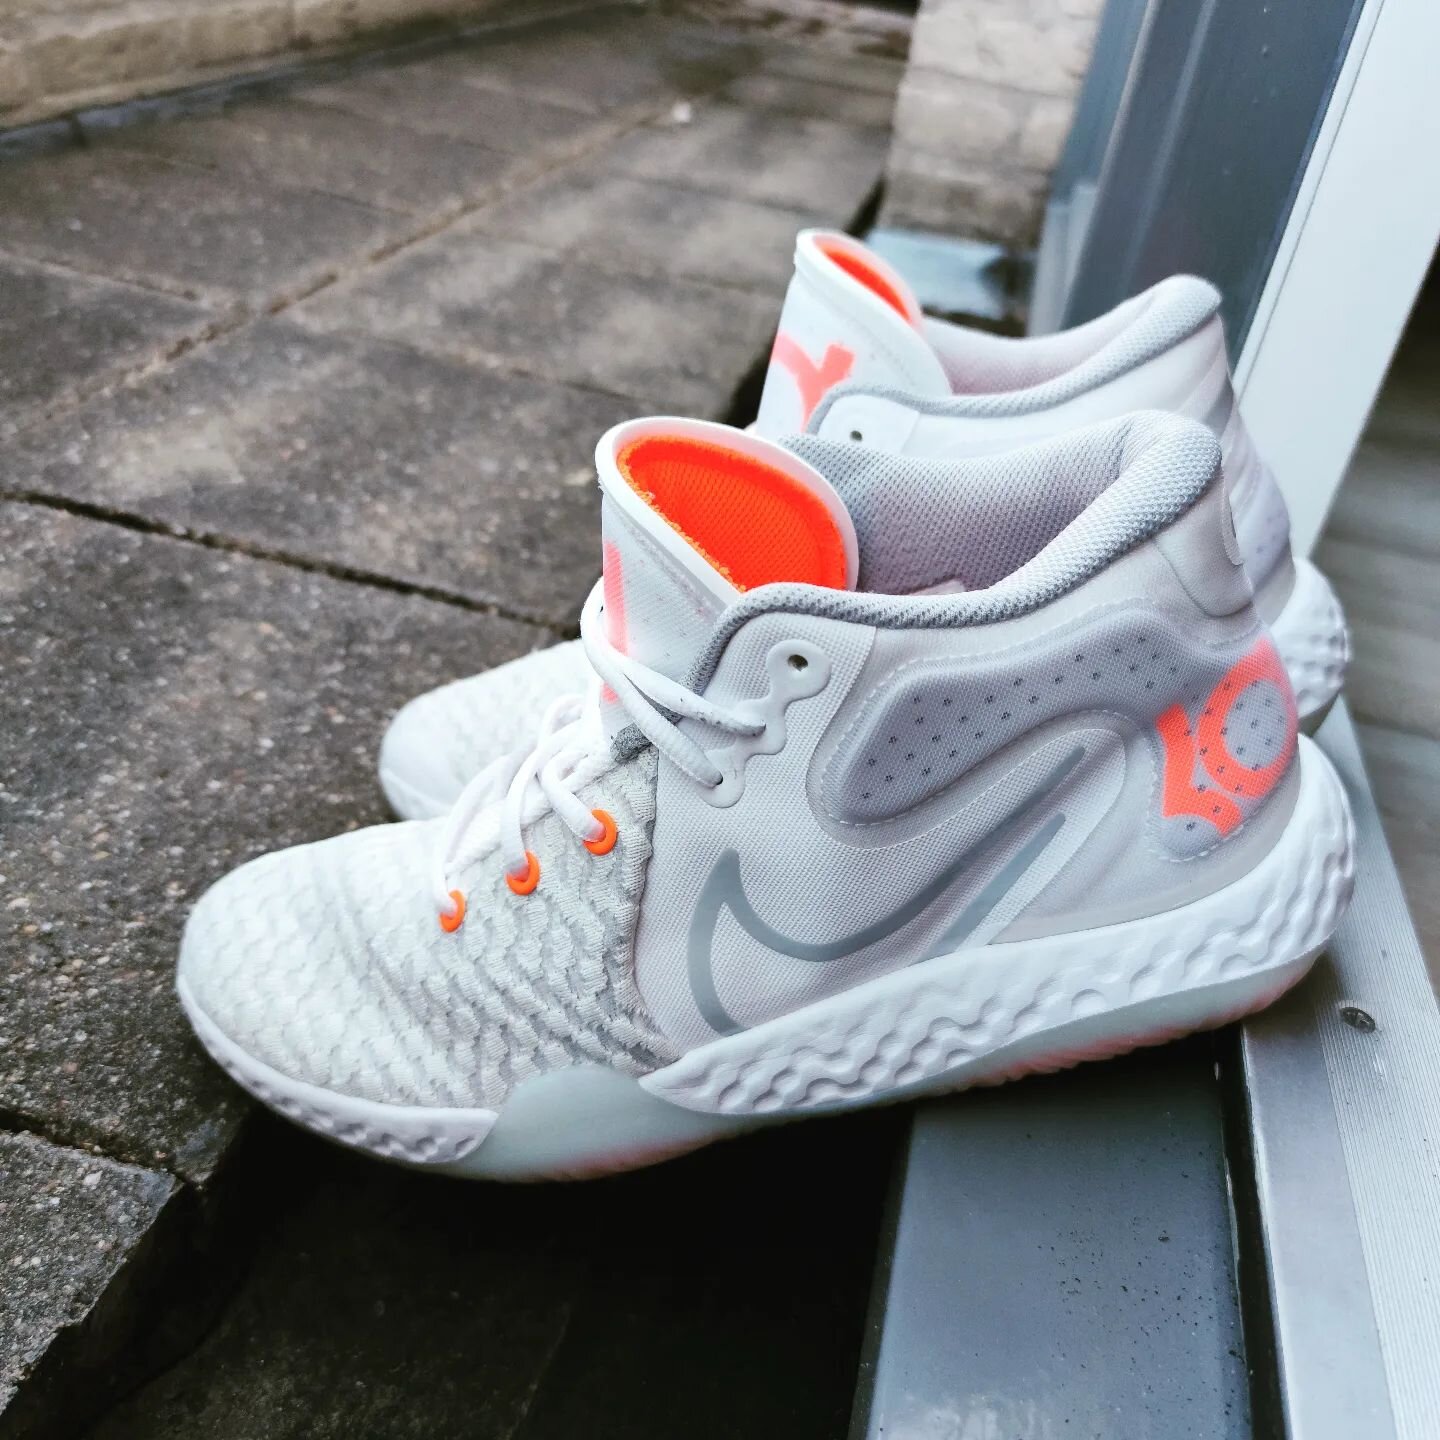 Today we rocking the #kd #sneakers  a.k.a. the Kevin Durant's #Trey5 in white &amp; Orange
#nike